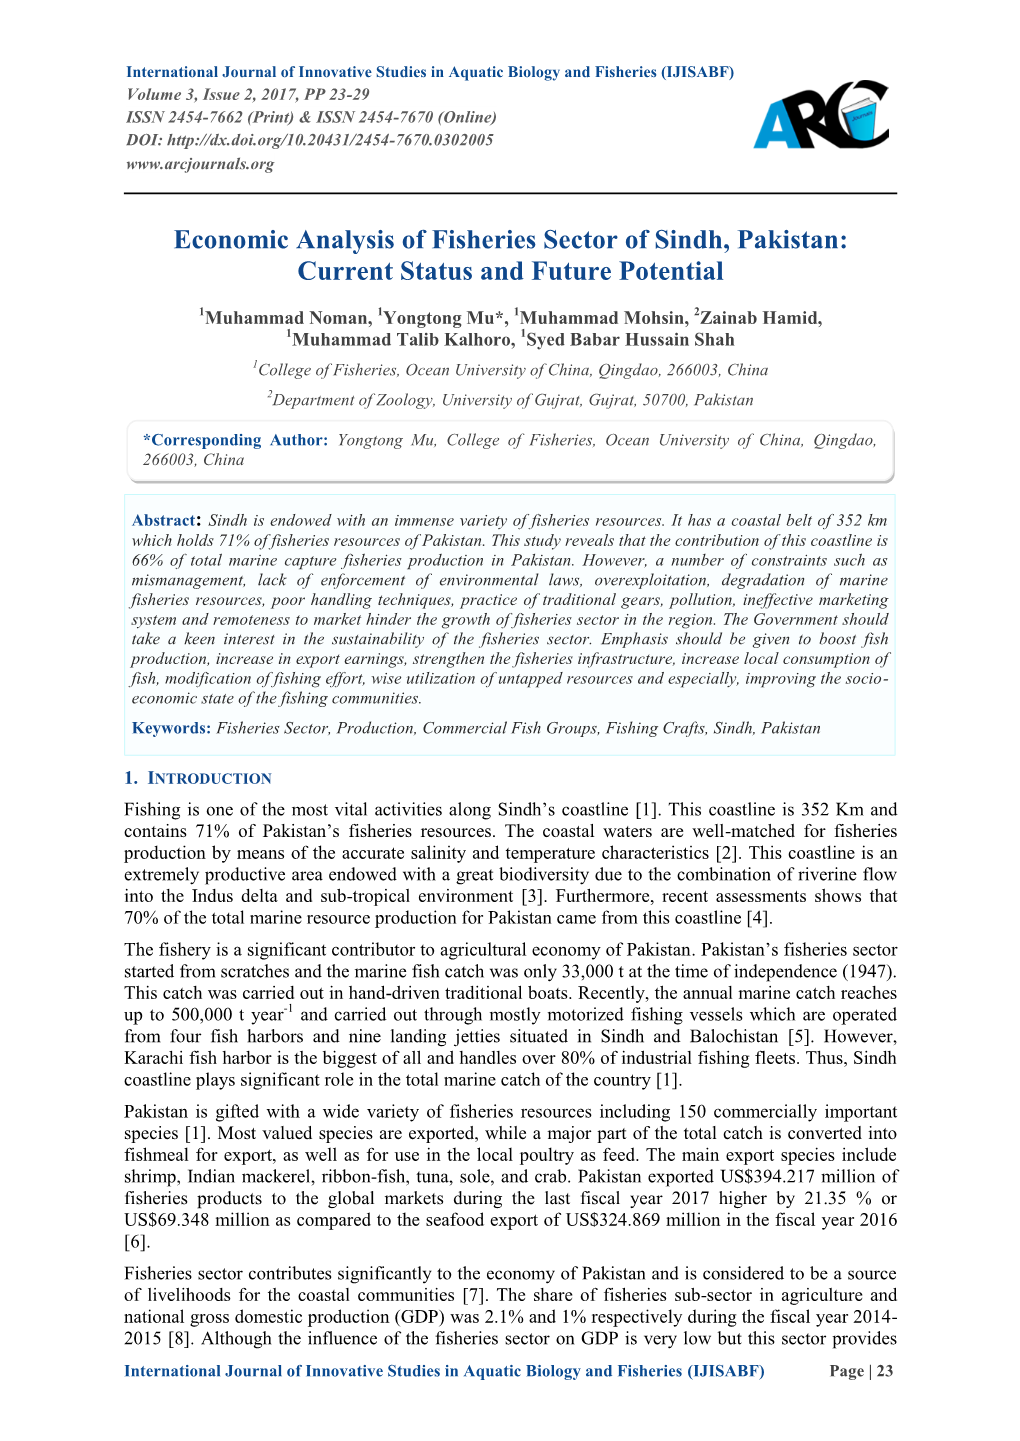 Economic Analysis of Fisheries Sector of Sindh, Pakistan: Current Status and Future Potential